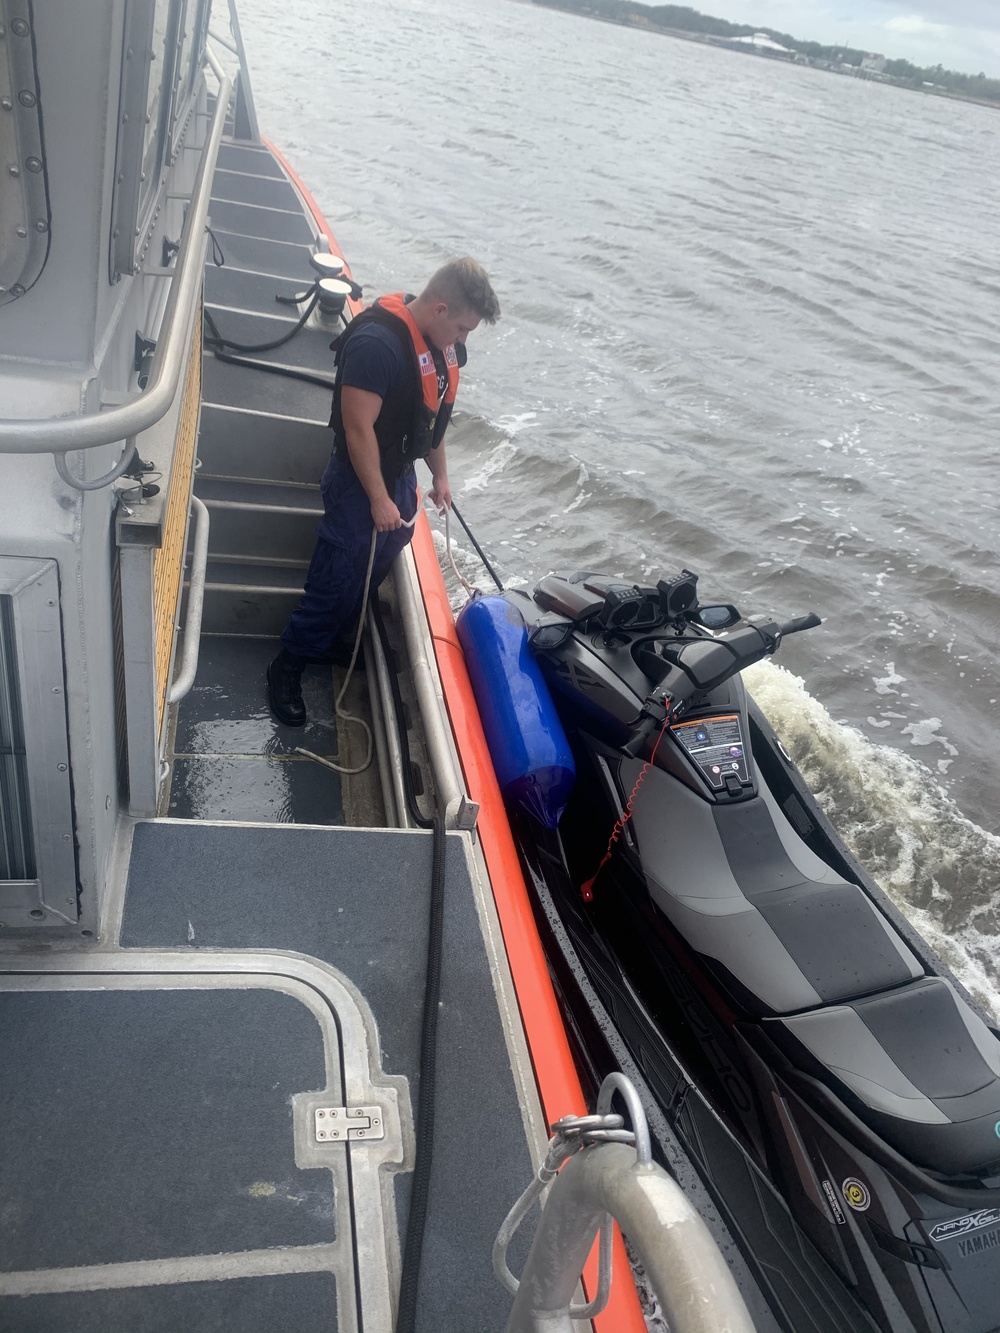 Coast Guard rescues 3 people on personal watercraft south of St. John's River Inlet